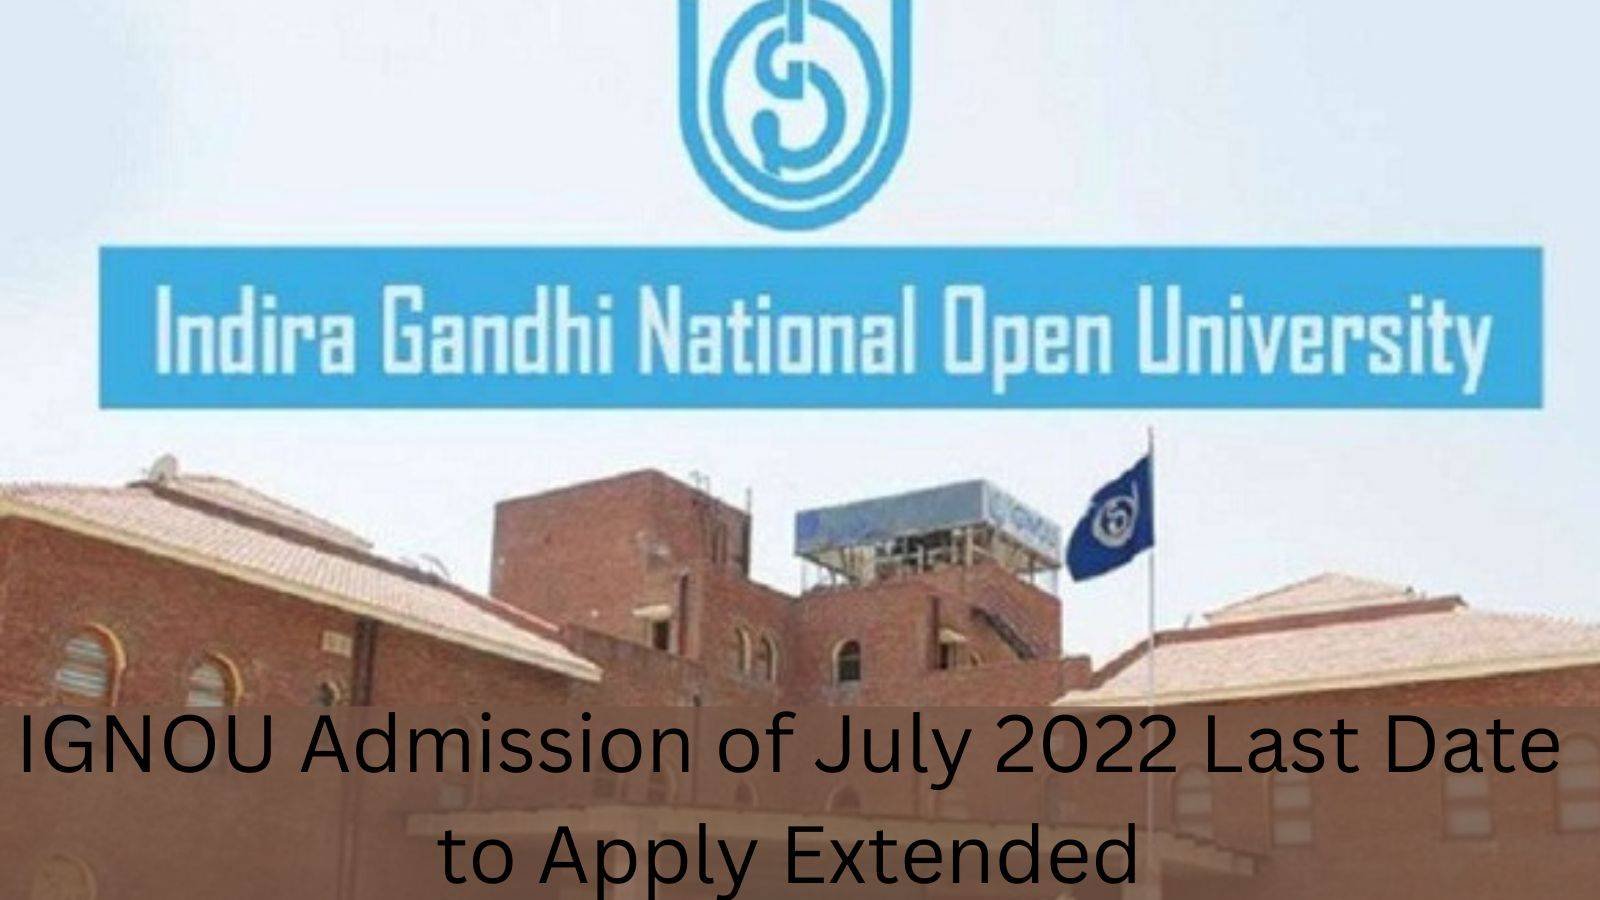 IGNOU Admission of July 2022 Last Date to Apply